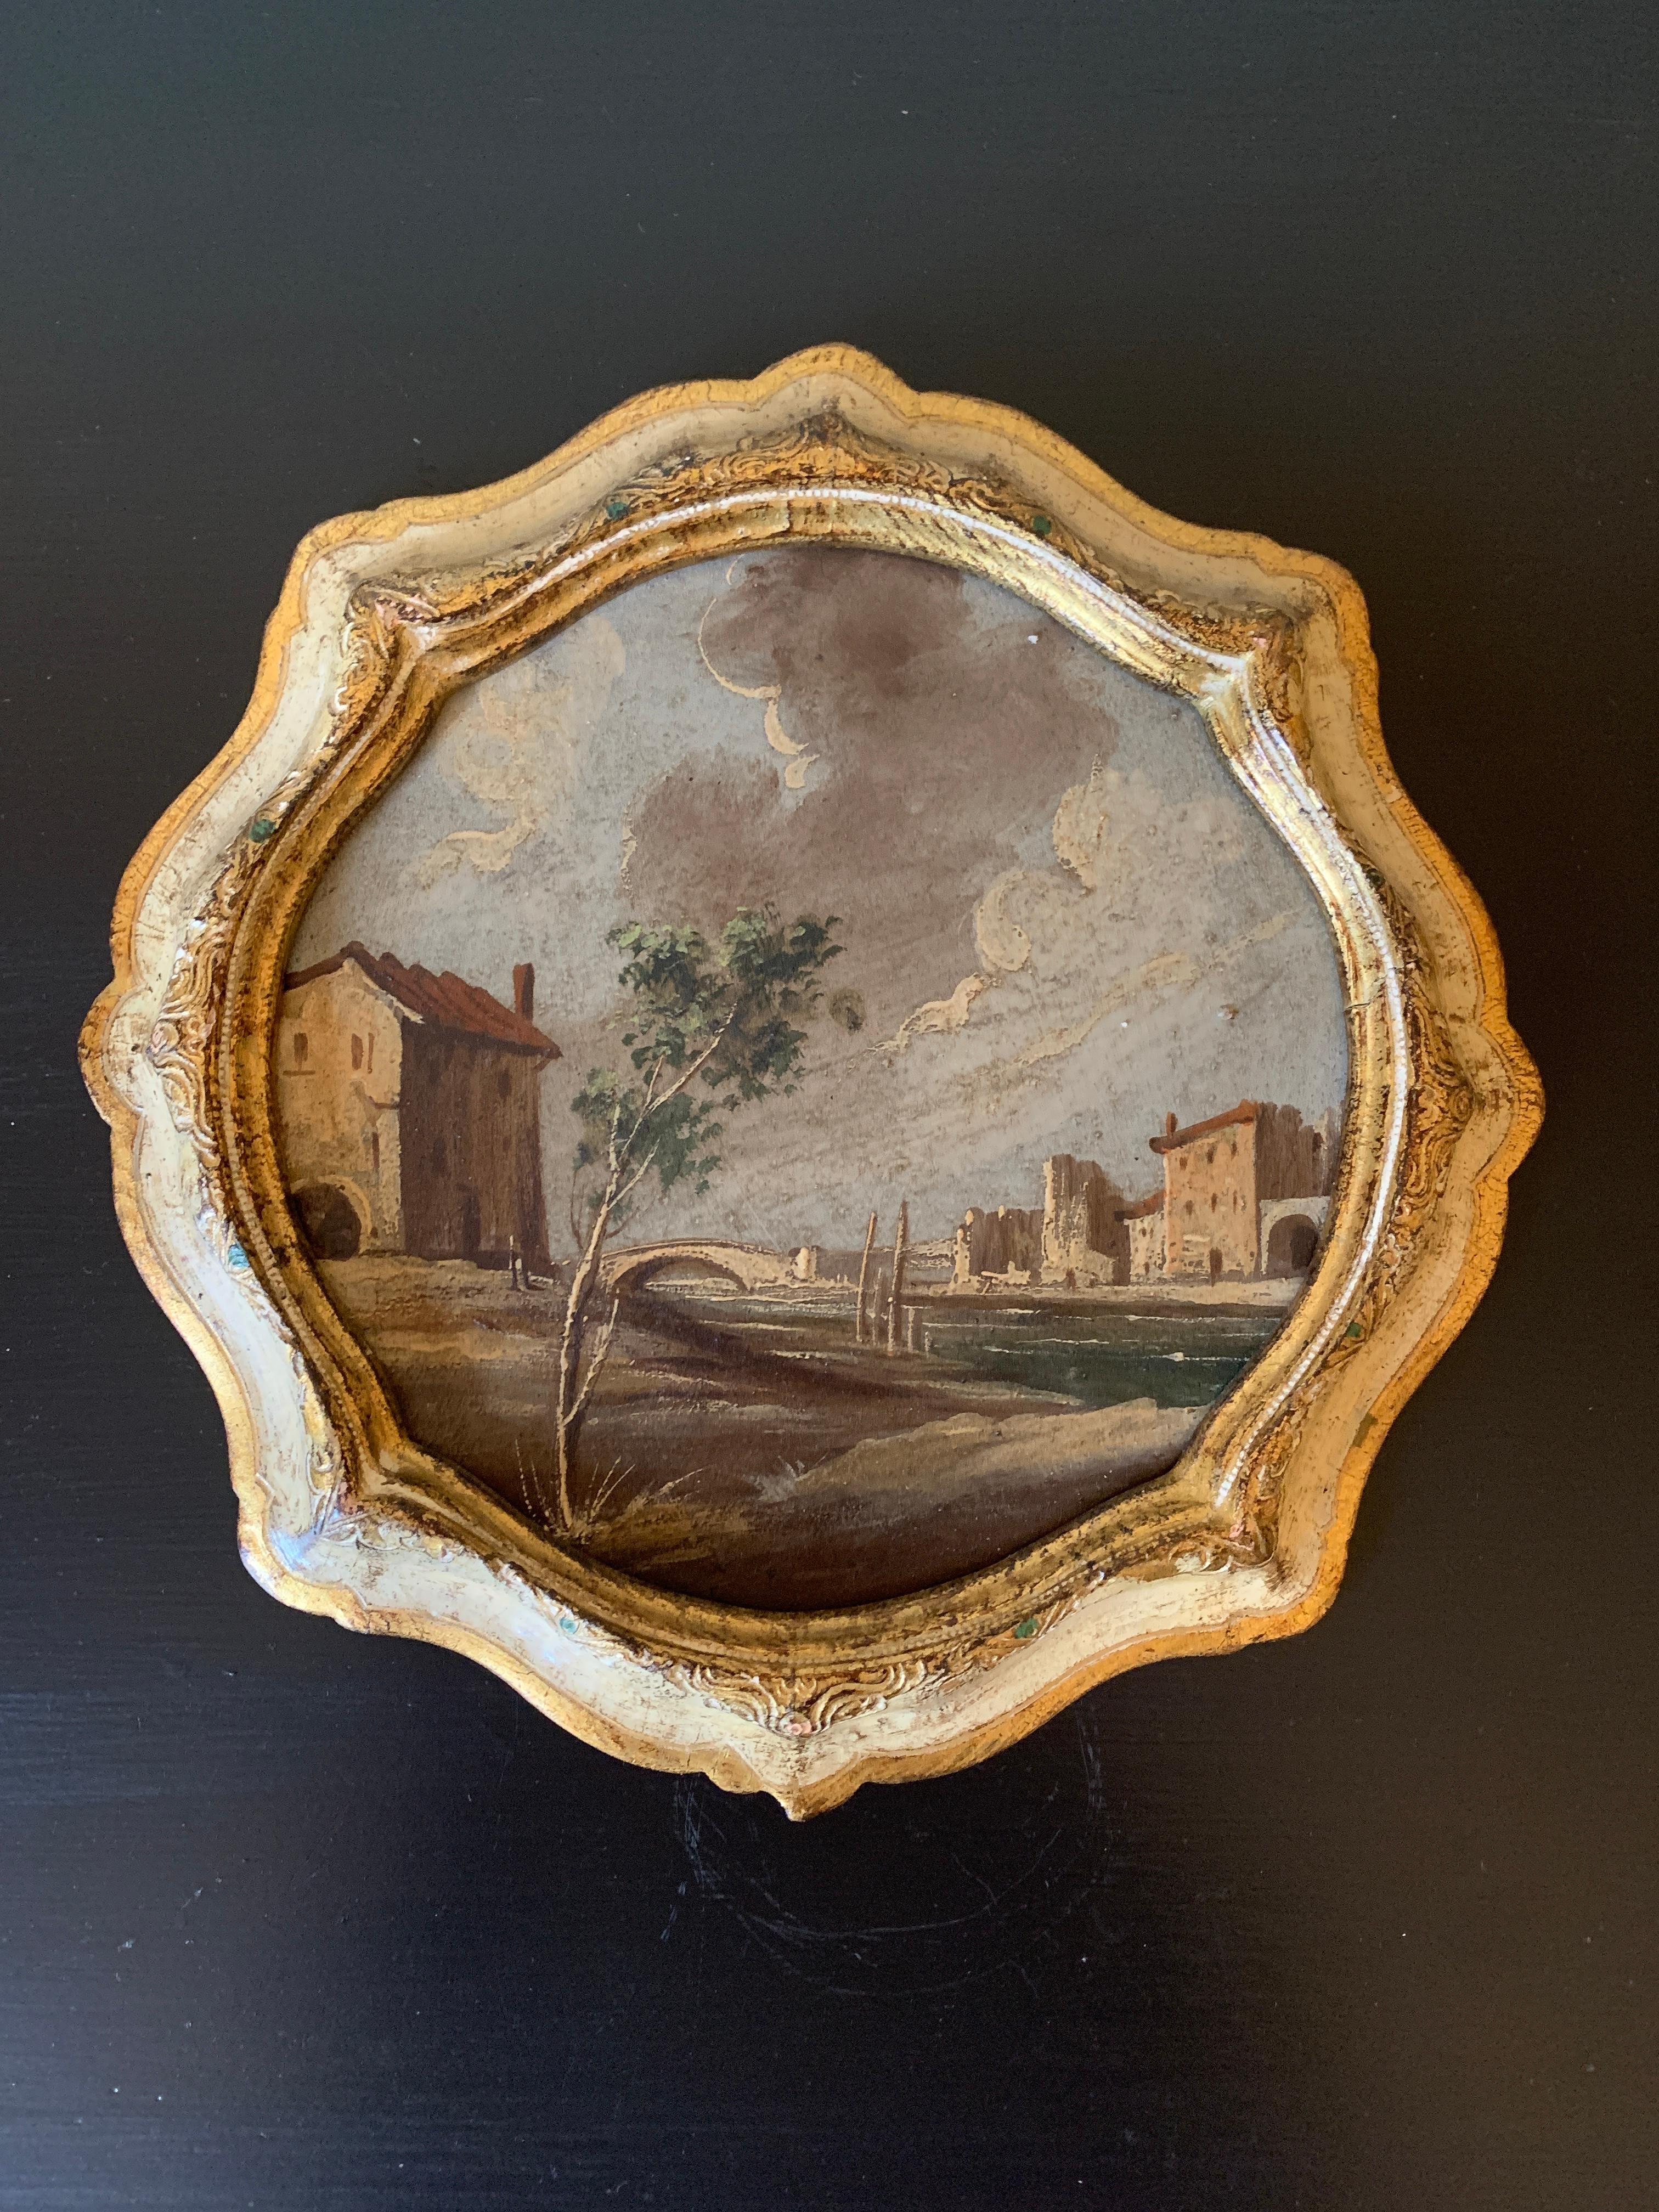 A gorgeous Grand Tour style framed oil painting of an Italian Capriccio landscape with ruins

Italy, Mid-20th Century

Oil on canvas, gilt frame

Measures: 9.5